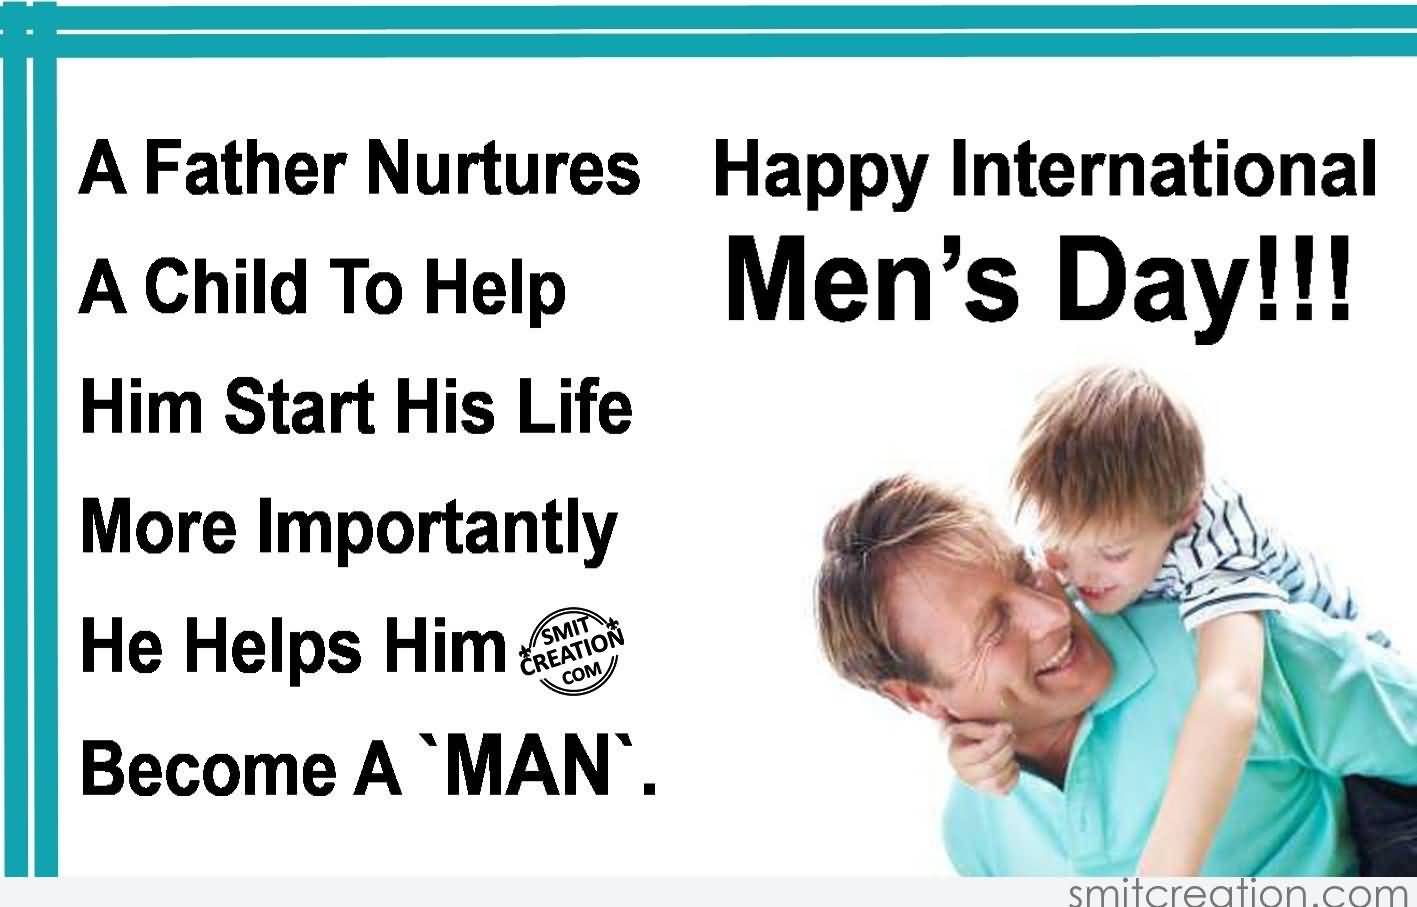 Happy International Men's Day A Father Nurtures A Child To Help Him Start His Life More Importantly He Helps Him Become A Man